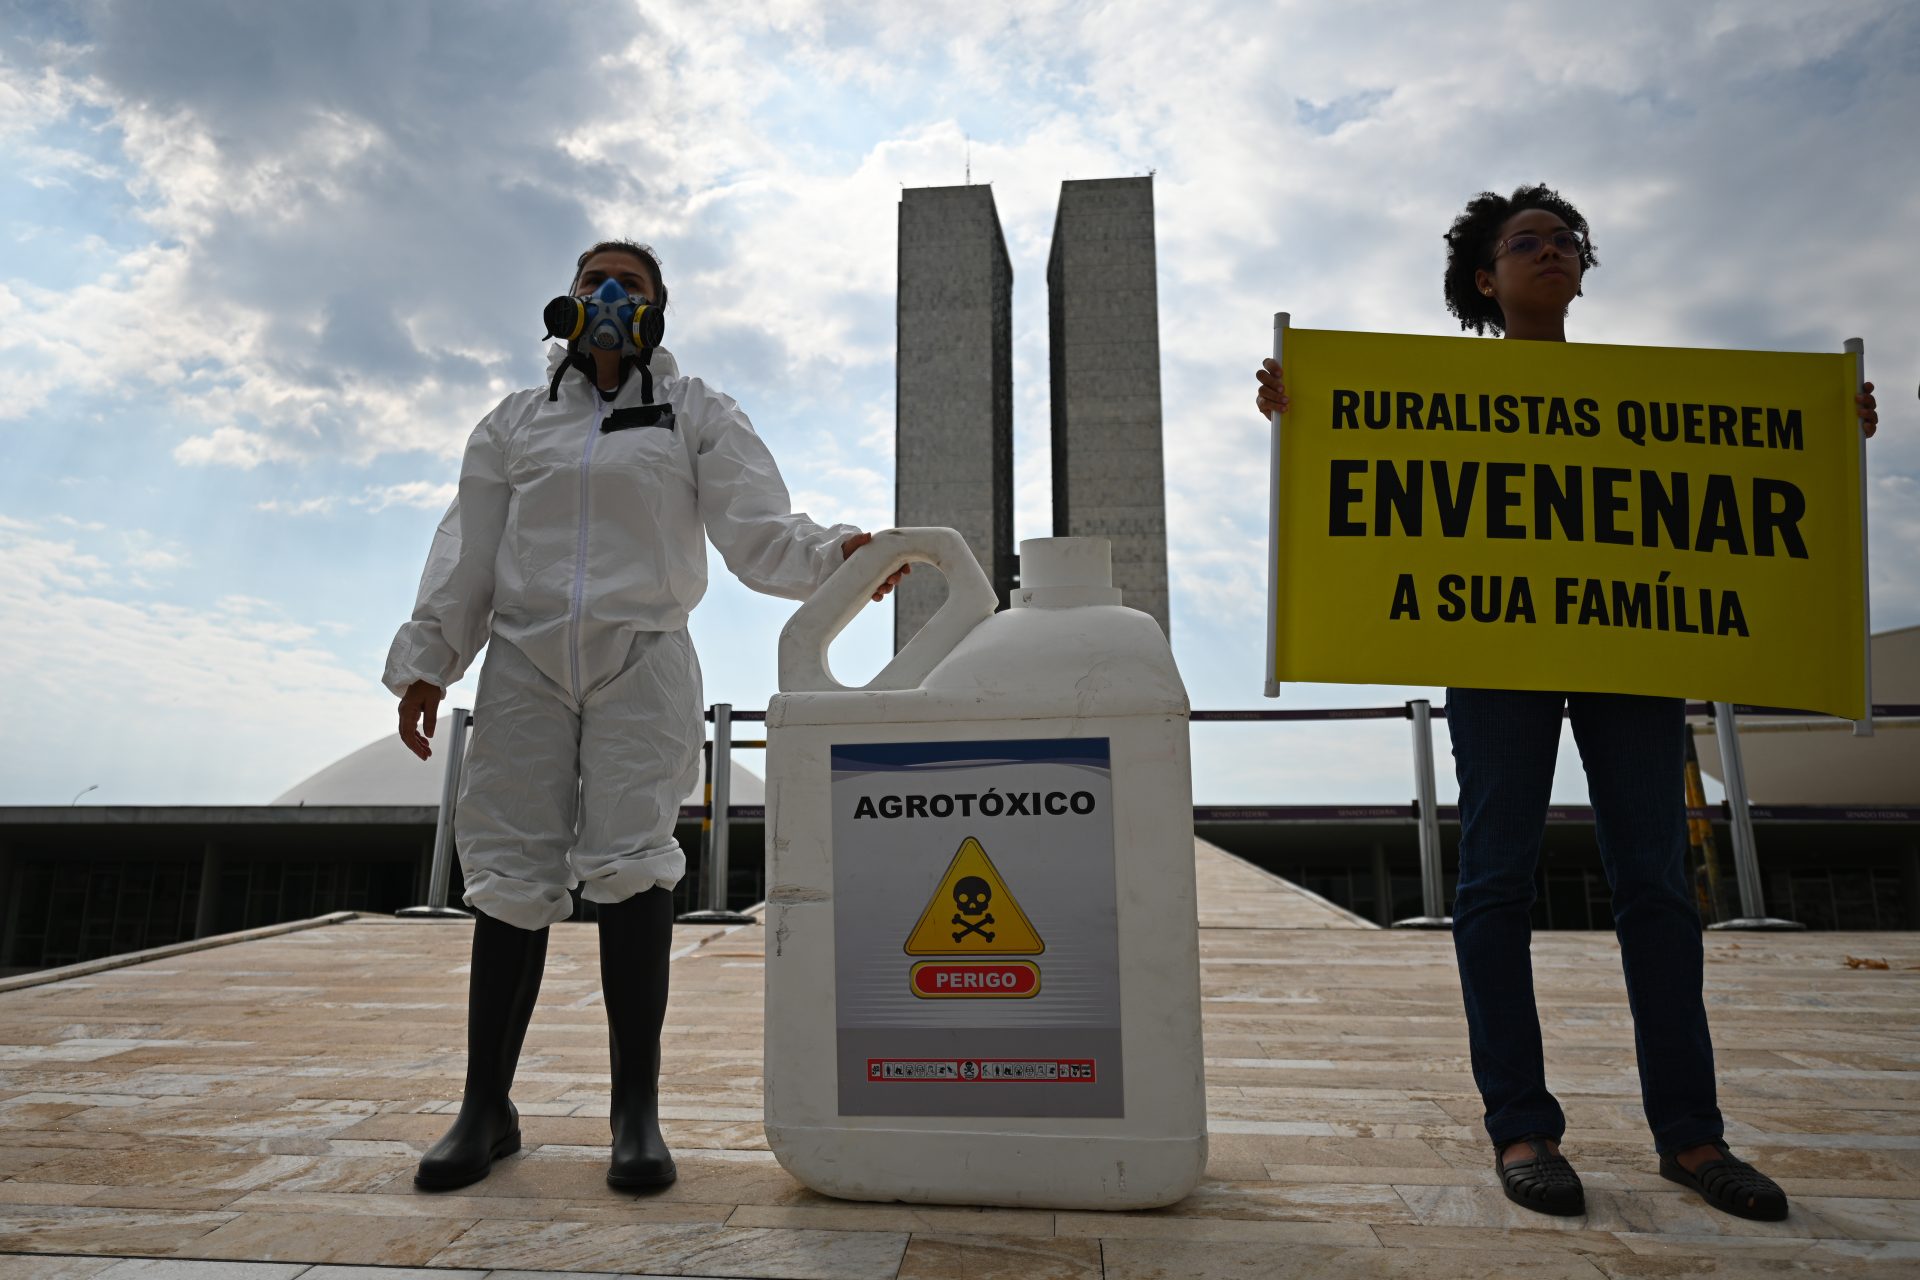 Greenpeace activists take part in a protest against the indiscriminate use of agricultural pesticides, in front of the National Congress in Brasilia, Brazil, 04 October 2023. Greenpeace asked the Brazilian Senate this Wednesday to shelve a bill that proposes making the use of pesticides in the countryside more flexible because it is a "serious threat" to the health of the population and the environment. The text, which plans to reduce the time for the registration of new pesticides, is the subject of harsh criticism by more than 140 civil society organizations, who see in it a high potential to harm human and animal health, as well as the biomes of the country. EFE/Andre Borges